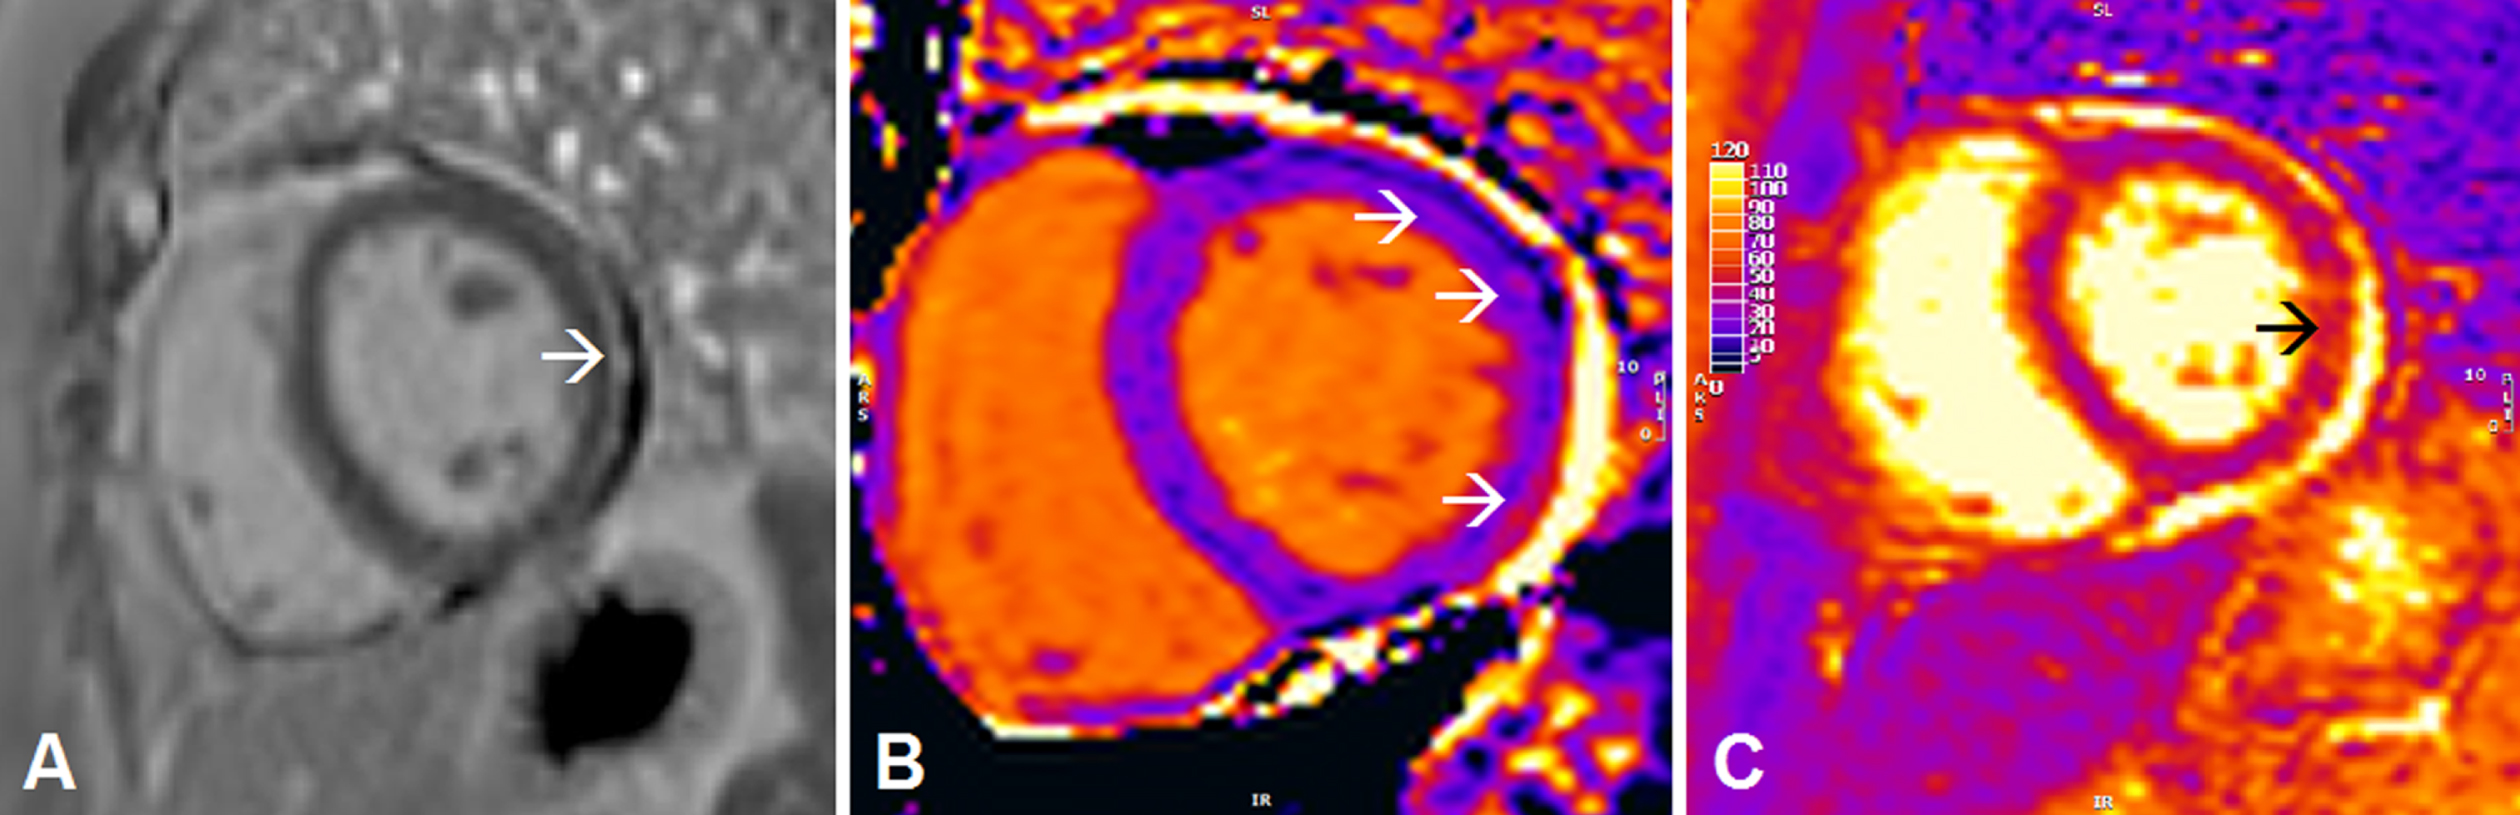 Abnormalities on cardiac magnetic resonance imaging (CMR) in short-axis view consistent with (peri)myocarditis in a patient with non-specific myositis/overlap myositis. Classic CMR (peri)myocarditis abnormalities: late gadolinium enhancement indicating myocardial fibrosis is seen epicardial in the basal-mid inferolateraal segment on T1-weighted imaging. Parametric T1/T2-mapping allows for quantitative (re-)evaluation of (peri)myocarditis abnormalities: increased values on T1-mapping (arrows Fig. 1B) and T2-mapping (arrow Fig. 1C) indicating myocardial oedema are (focally) seen in the inferolateral segment (short axis view).